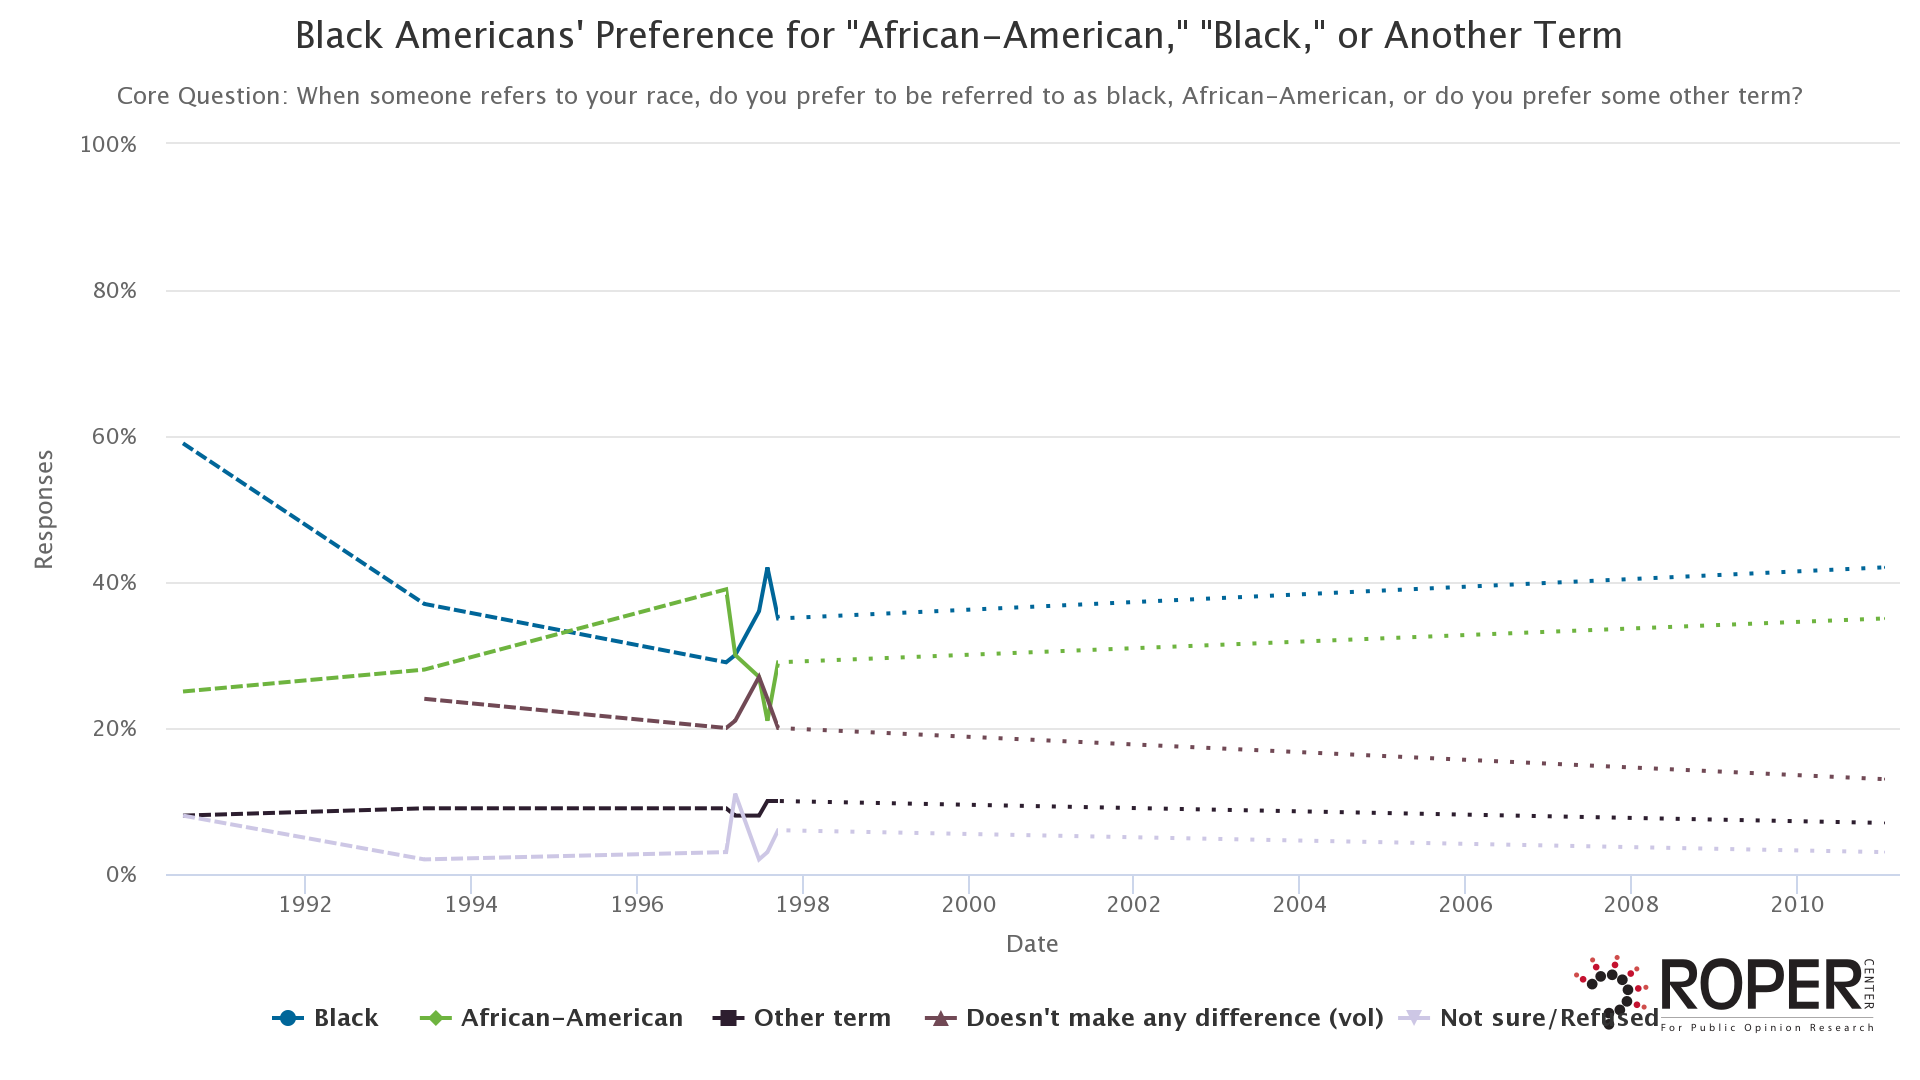 Black Americans' Preference for "African-American," "Black," or Another Term (1990 - 2011)